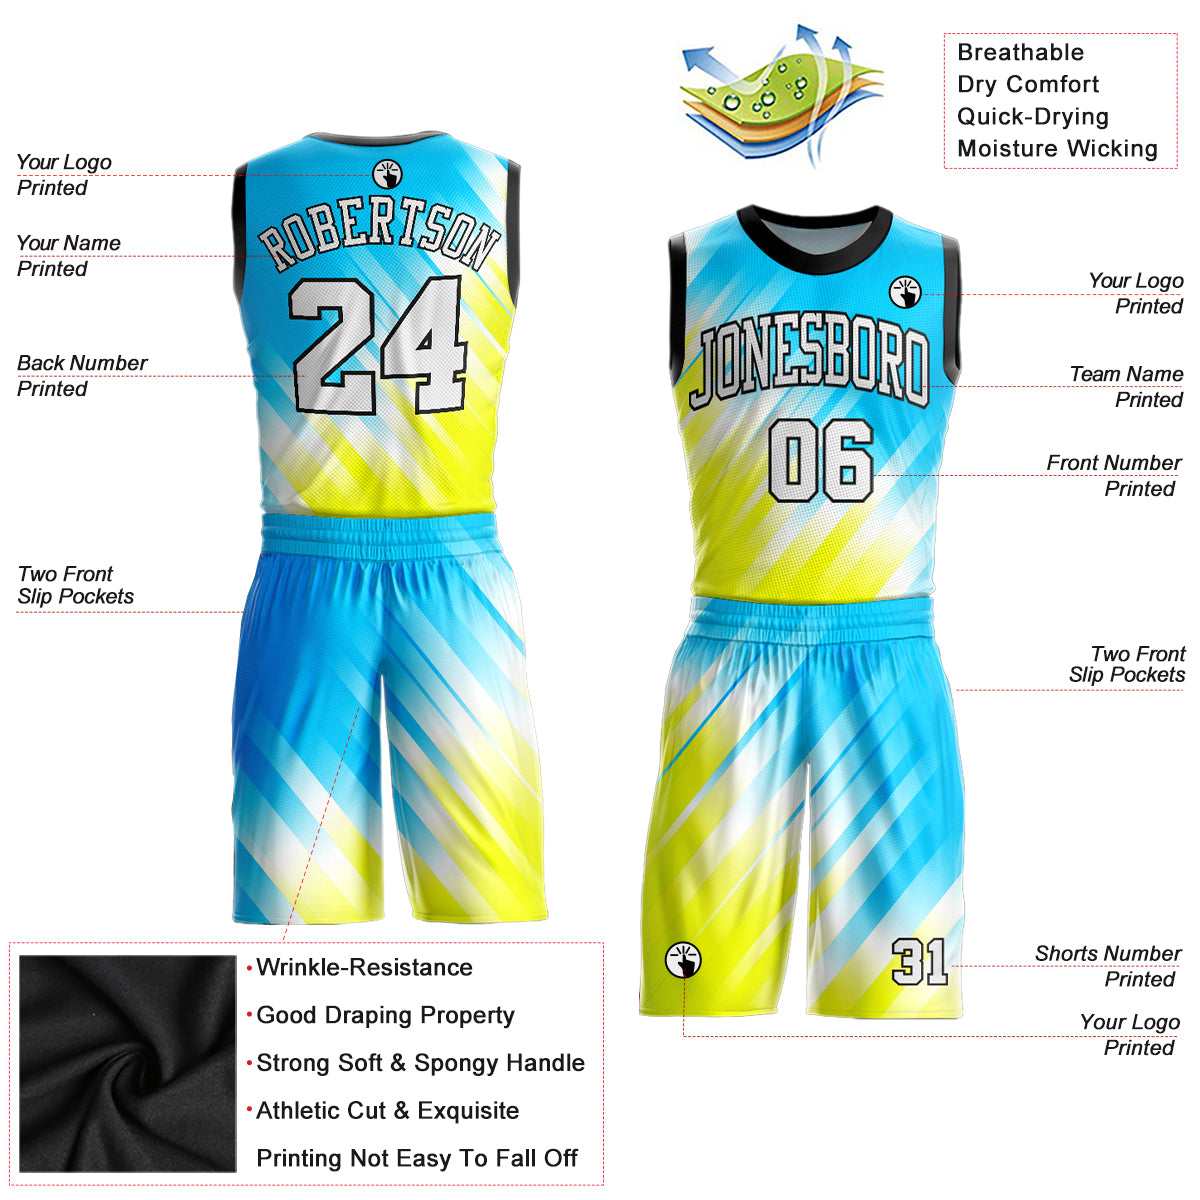 sublimation basketball jersey design green and white